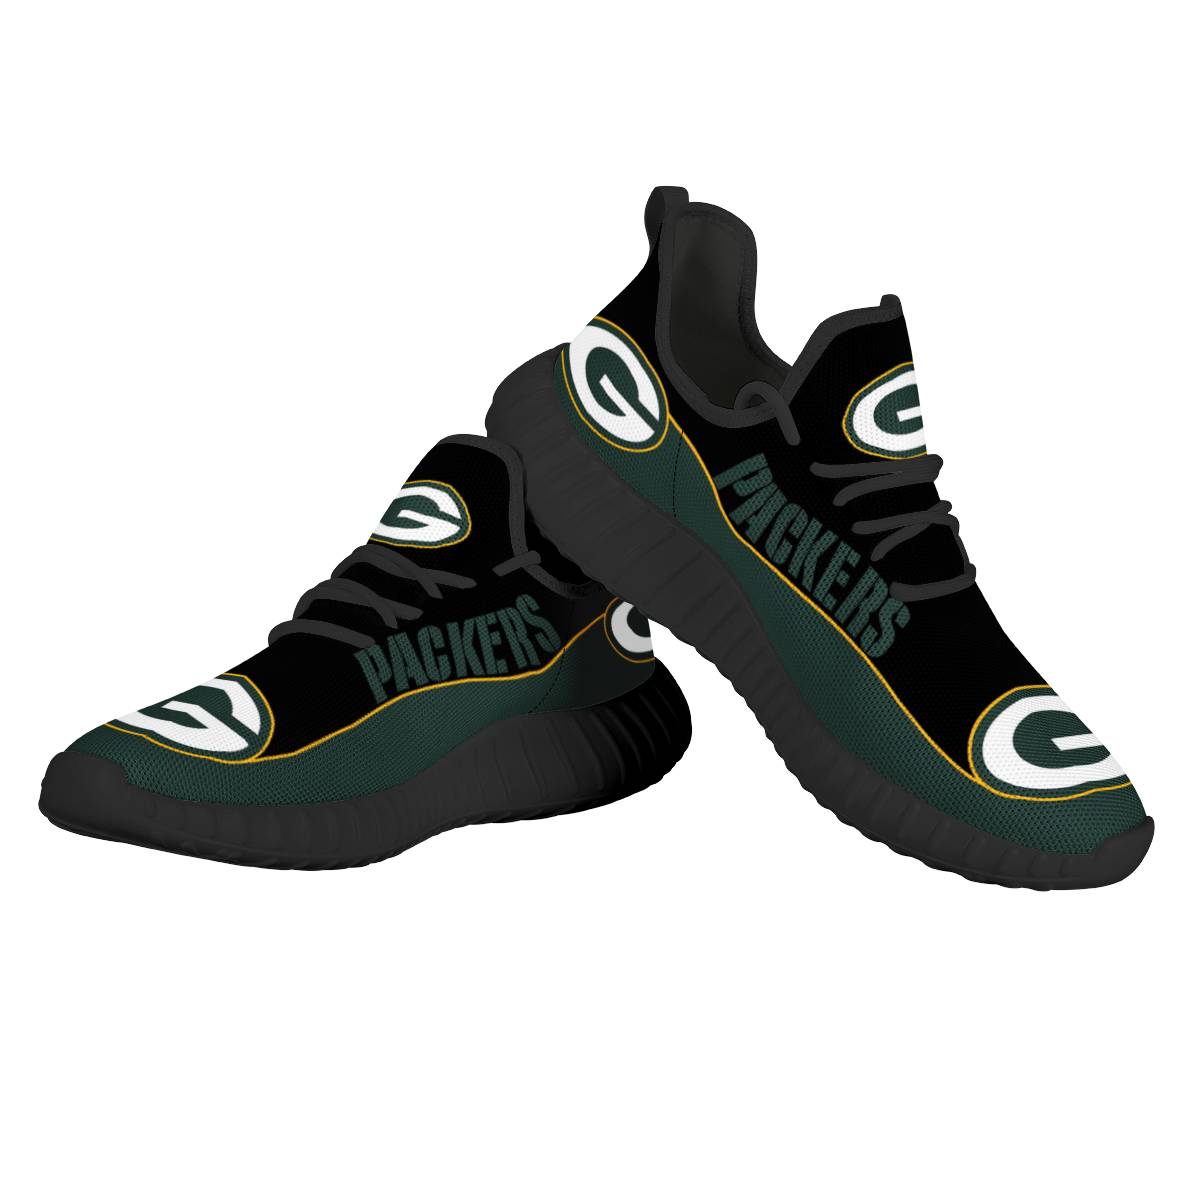 Men's NFL Green Bay Packers Mesh Knit Sneakers/Shoes 008